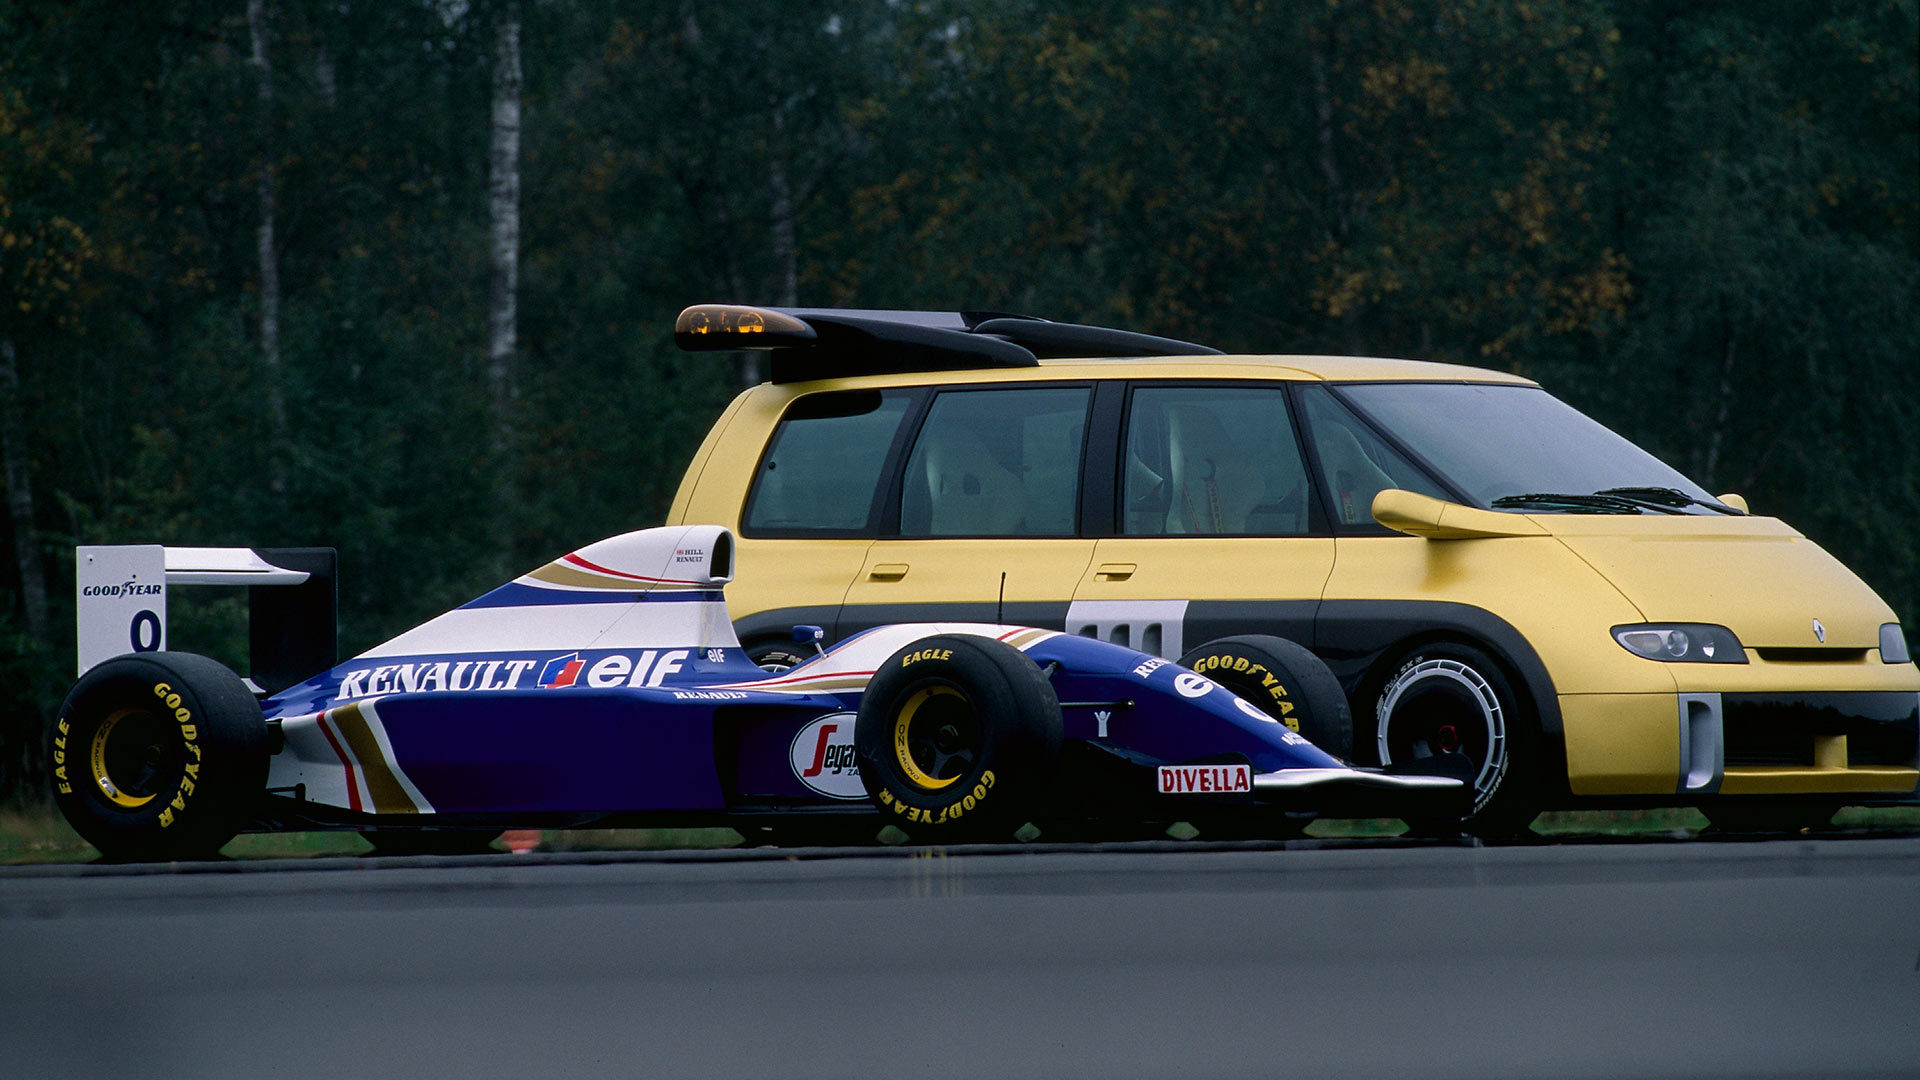 The time Renault placed an F1 engine in the Espace minivan